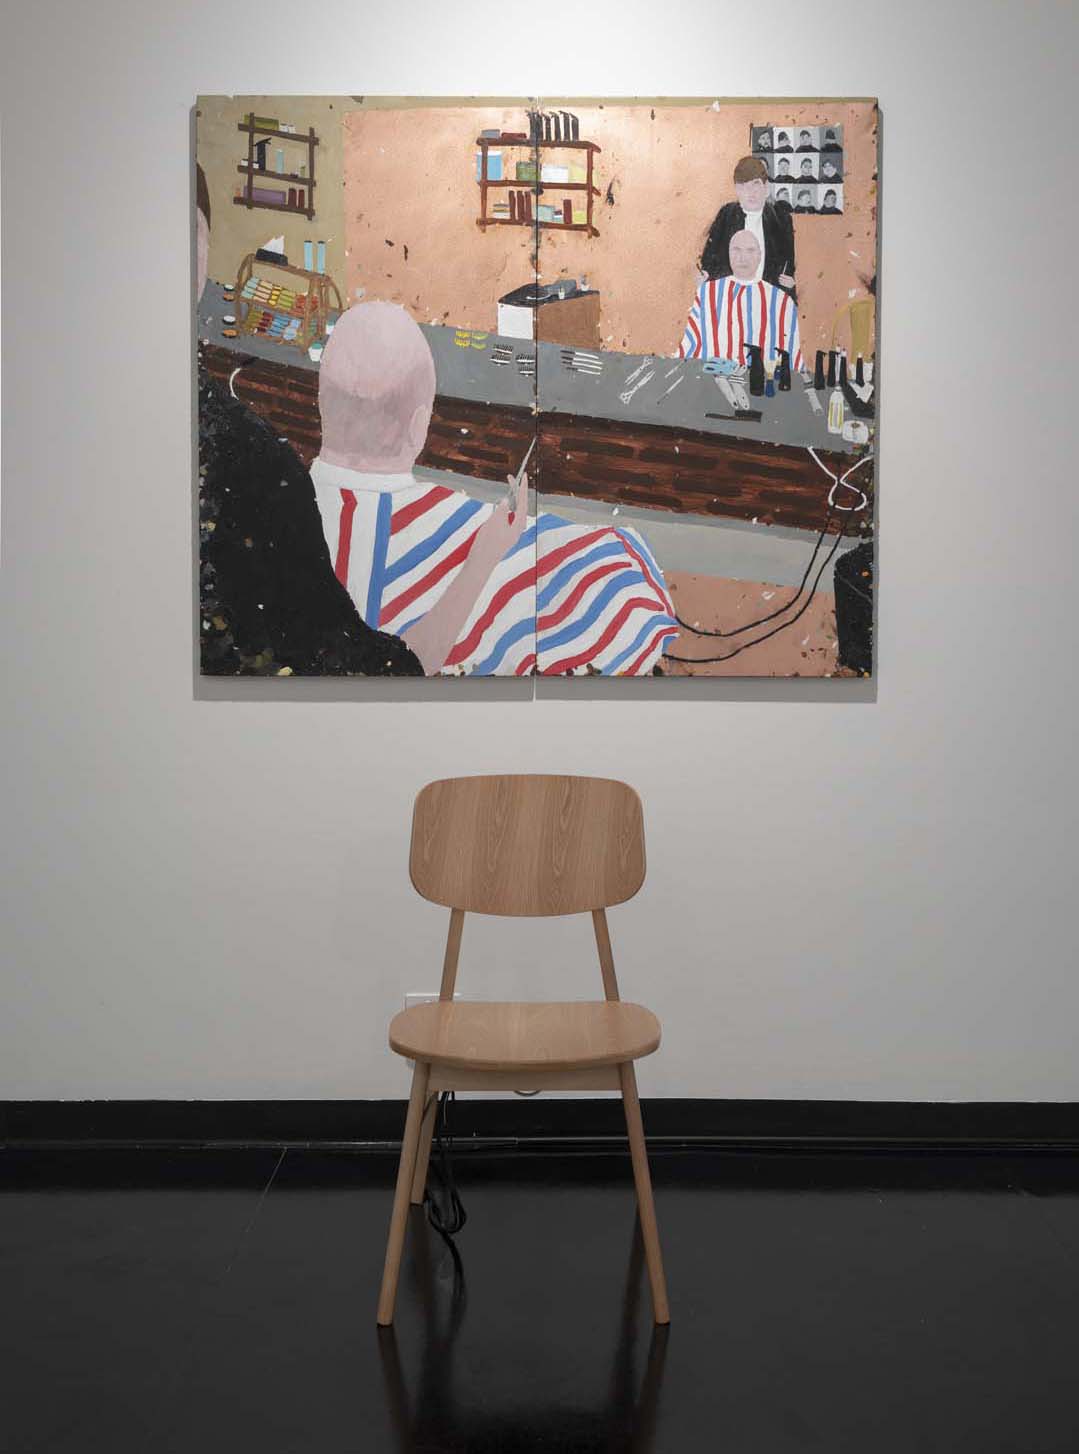 Foreground: French & Mottershead, ‘Grey granular fist’, 2017, chair, sensor, audio player, headphones, sound. © French & Mottershead. Courtesy the artists. Background: Richard Lewer, ‘As a bald man, I miss going to the barber’, 2019, oil on copper. © Richard Lewer. Courtesy the artist and Hugo Michell Gallery. Photo: Ian Hill